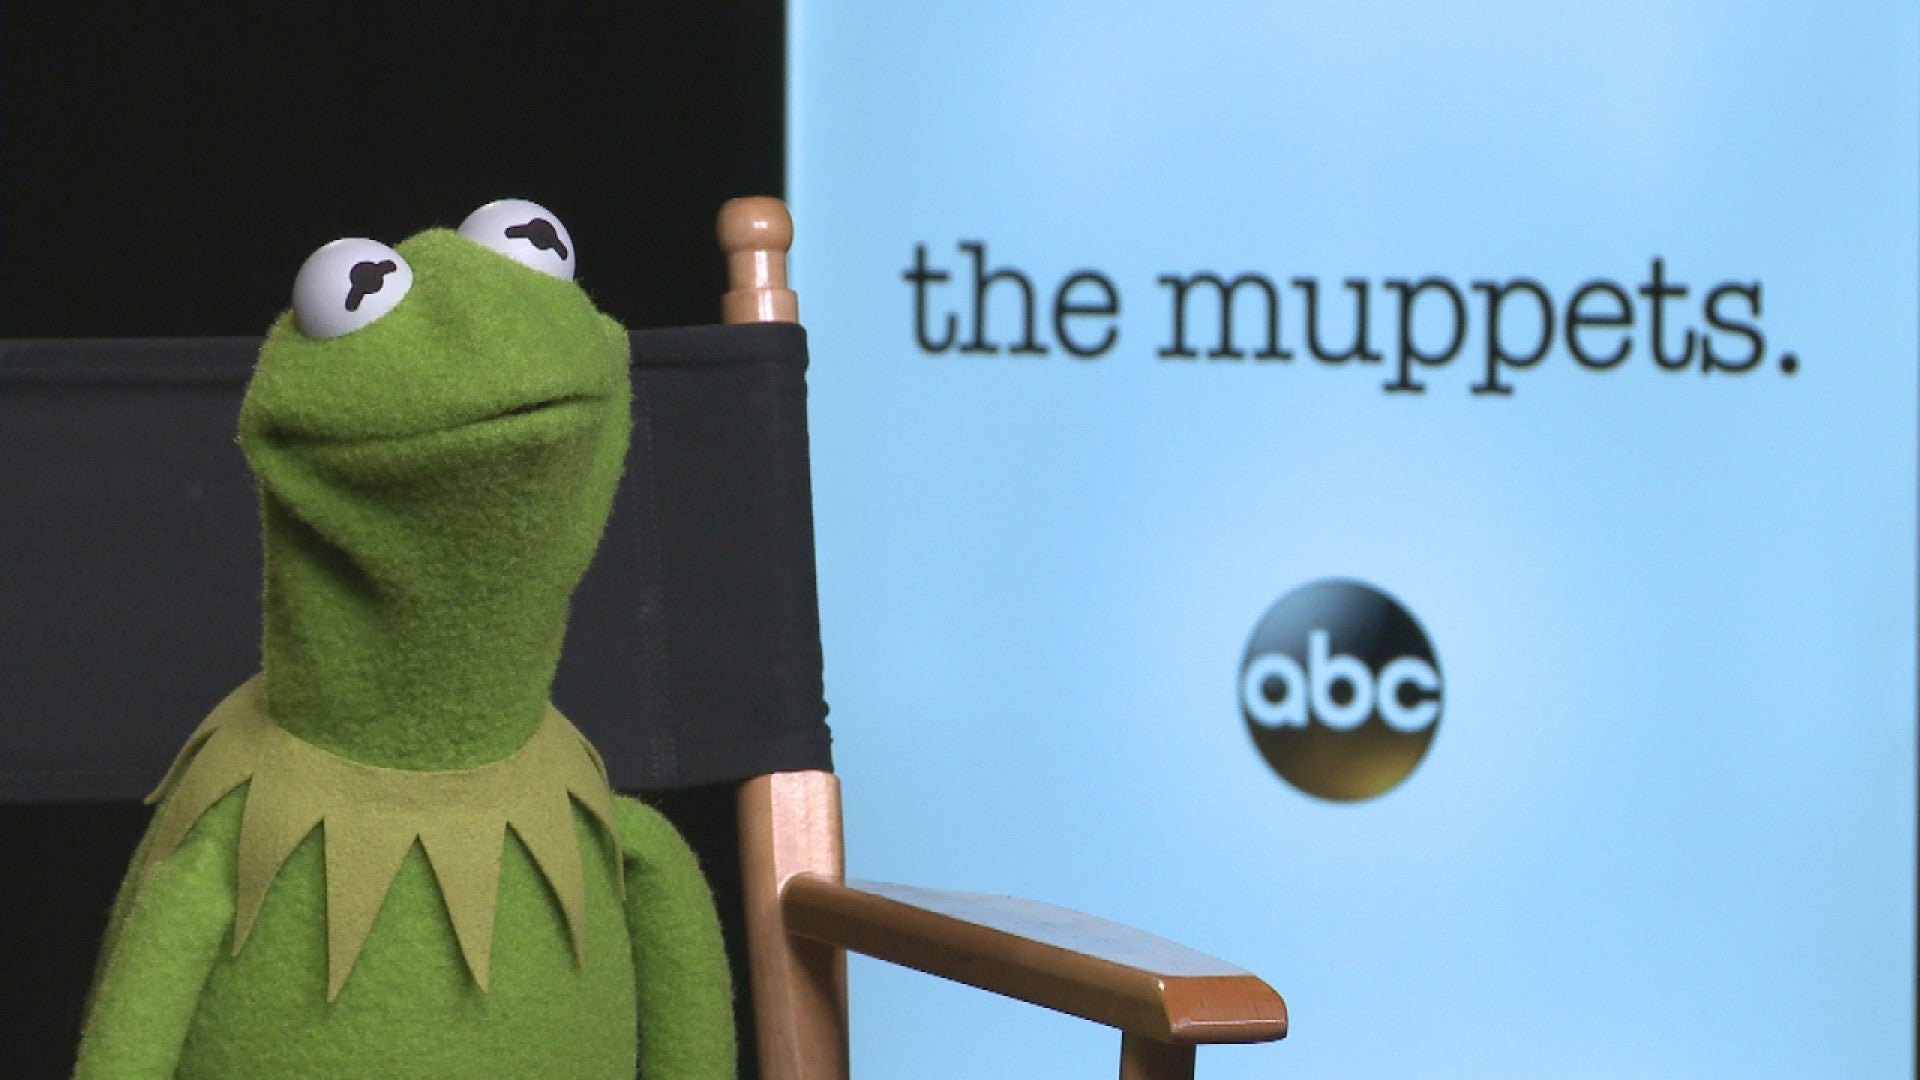 Kermit and Miss Piggy: Muppets Now should retire their relationship.